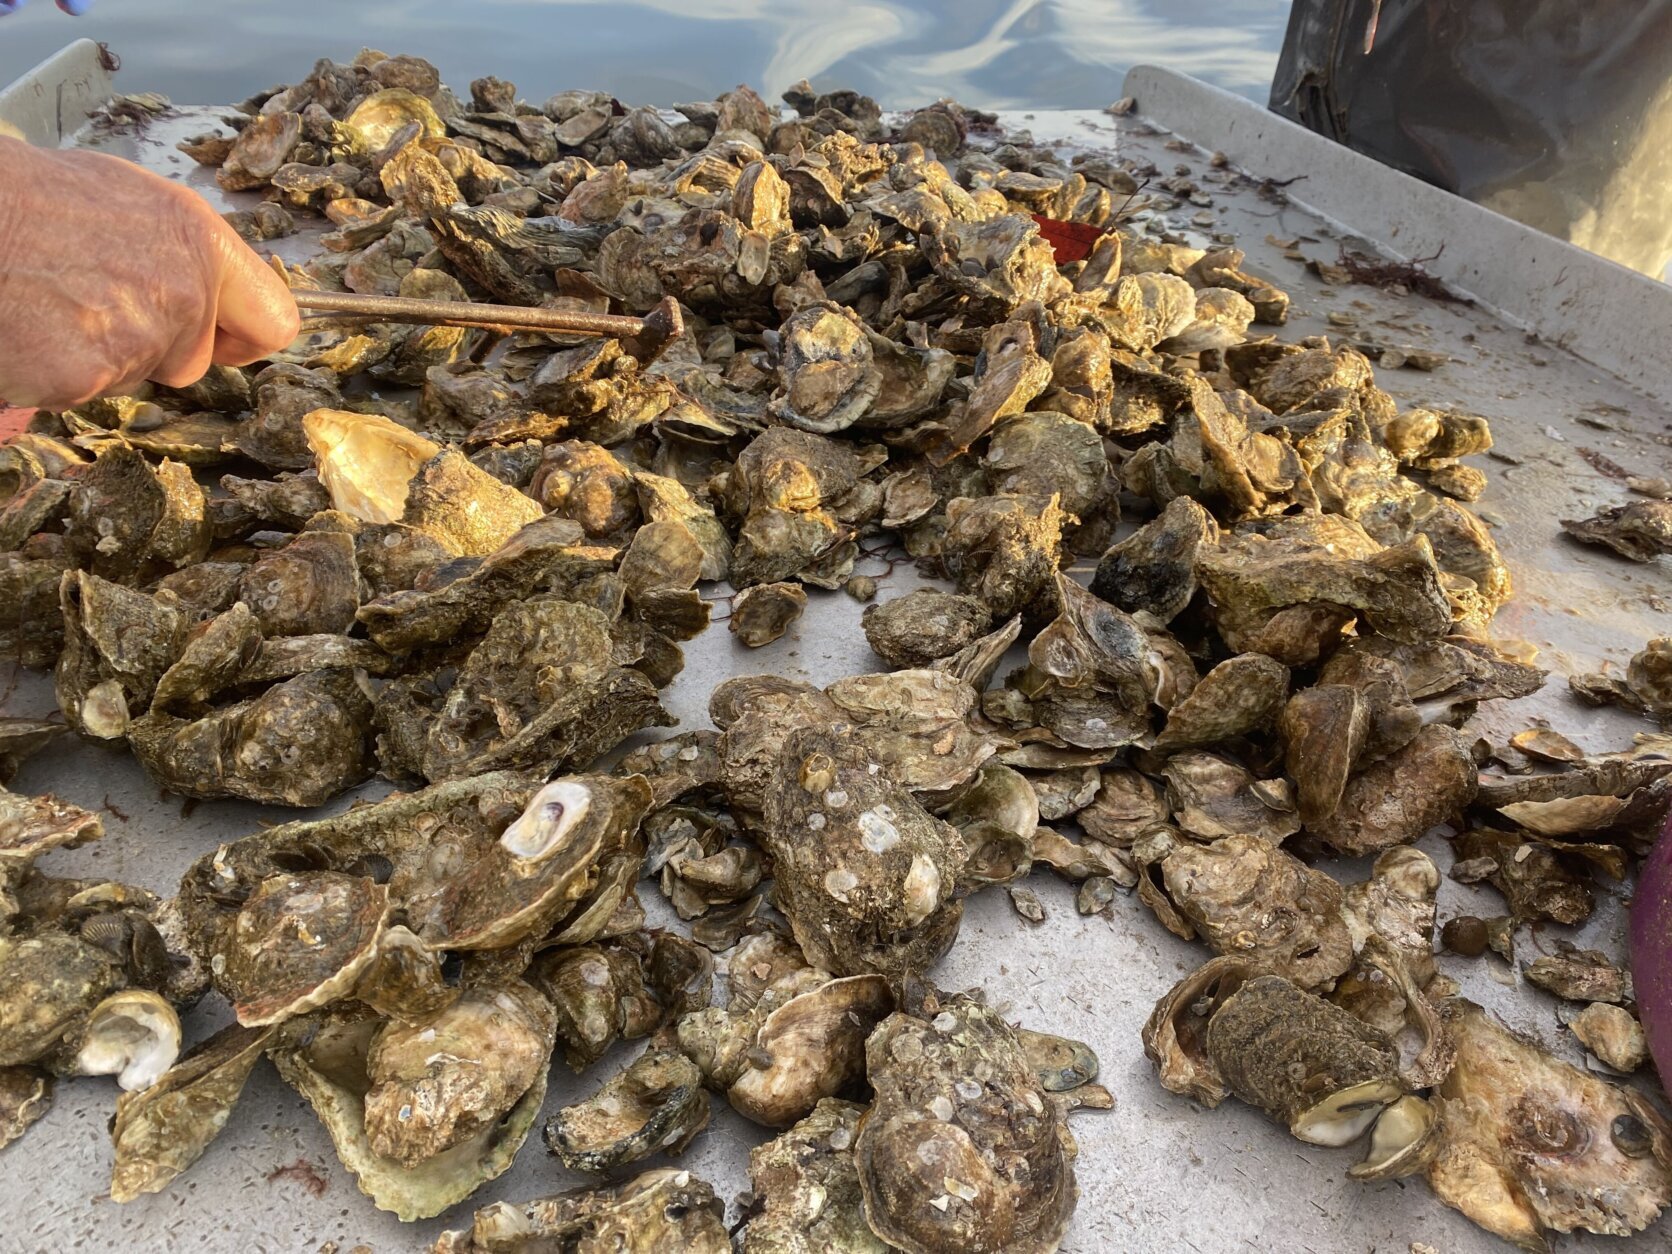 <p>Brown, who is also the president of the Maryland Watermen’s Association, said the repeated rainfall that’s drenched the mid-Atlantic the past couple of months will reduce that salinity at a time when oysters need that to boost their immune system and avoid disease.</p>
<p>But just when supplies are rising, demand appears to be waning, meaning Maryland’s watermen are making less money than they used to.</p>
<h3>Bushels sell for less, impacting watermen’s bottom line</h3>
<p>“Well, it&#8217;s very simple. I think seafood is a luxury,” Brown said.</p>
<p>Even though many economic indicators are and have been positive for a while, it doesn’t mean people haven’t been wary about spending on certain things. And Brown said at the grocery store the amount of chicken or beef you can get for $35 goes a lot further than the amount of oysters you can get for $35. That’s sent the price of a bushel of oysters from $45-50 down to around $35.</p>
<p>“When you&#8217;re down that much on your sales, that&#8217;s your gross, that&#8217;s where you profit is,” Brown said. “Your profit is not in the first bushel you catch, it&#8217;s in the last bushel you catch because you know you got to keep the boots up, the equipment up.&#8221;</p>
